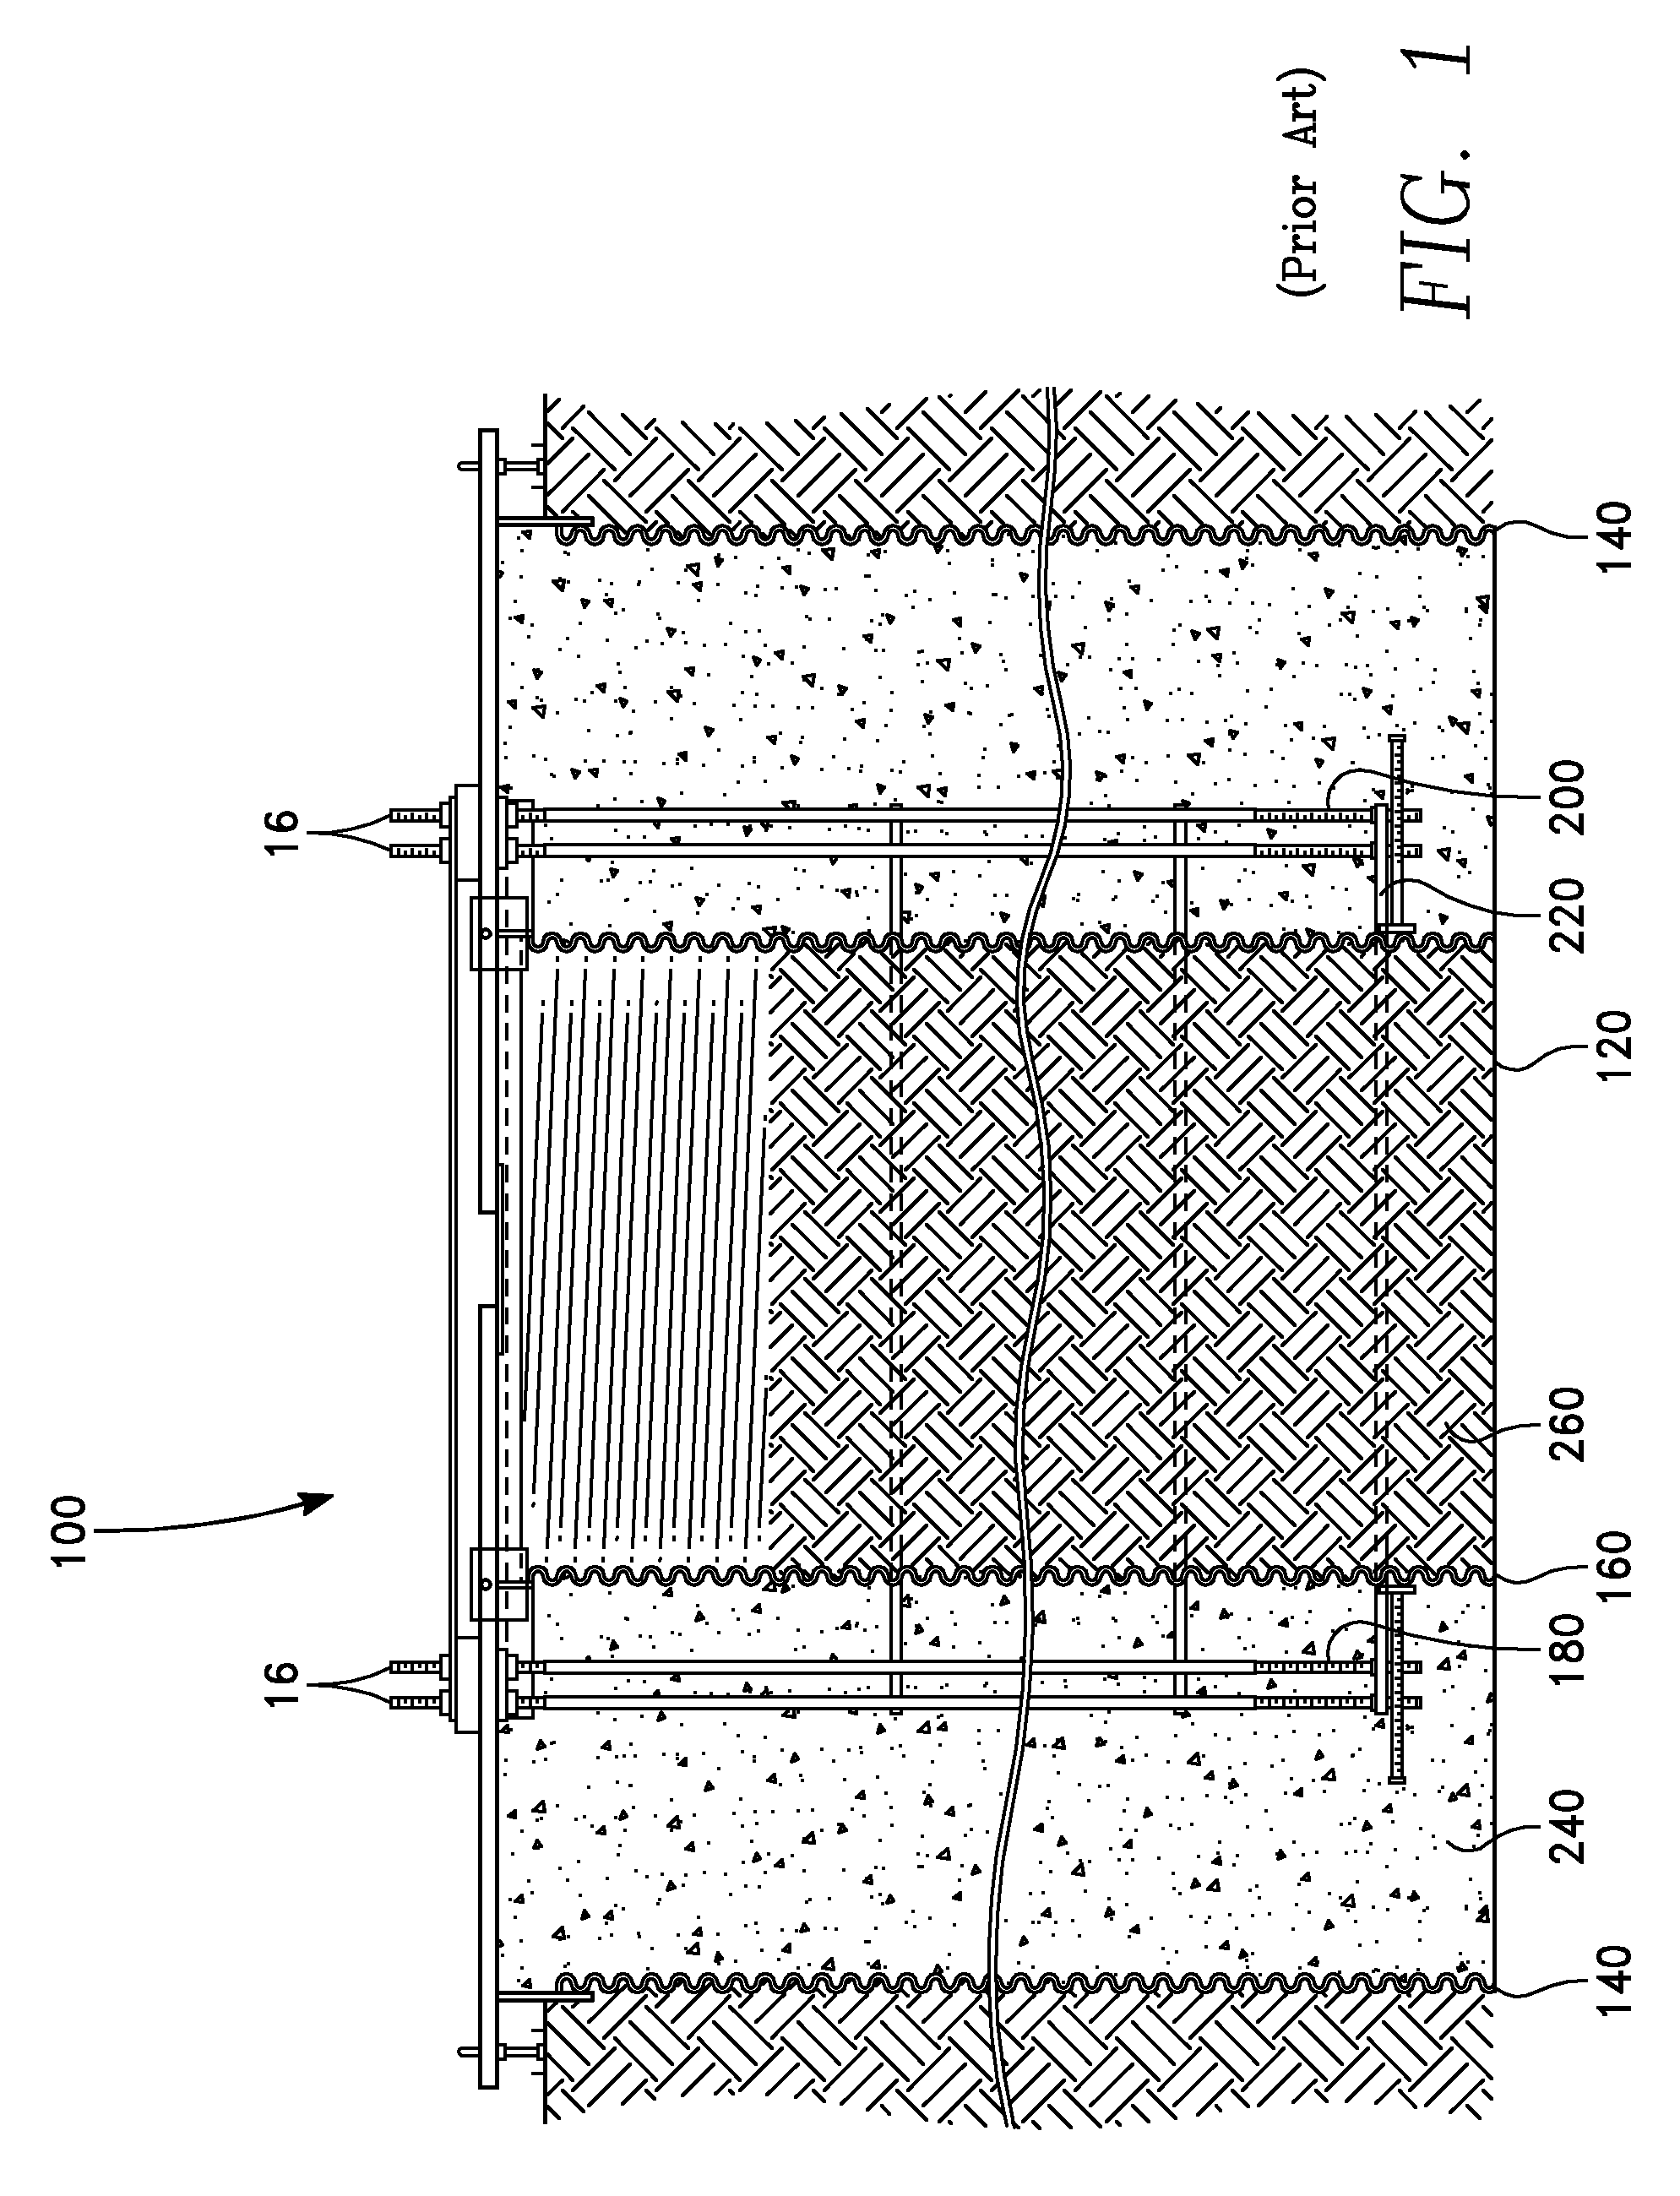 Foundation for a Wind Turbine Utilizing a Slurry of Low Viscosity Grout